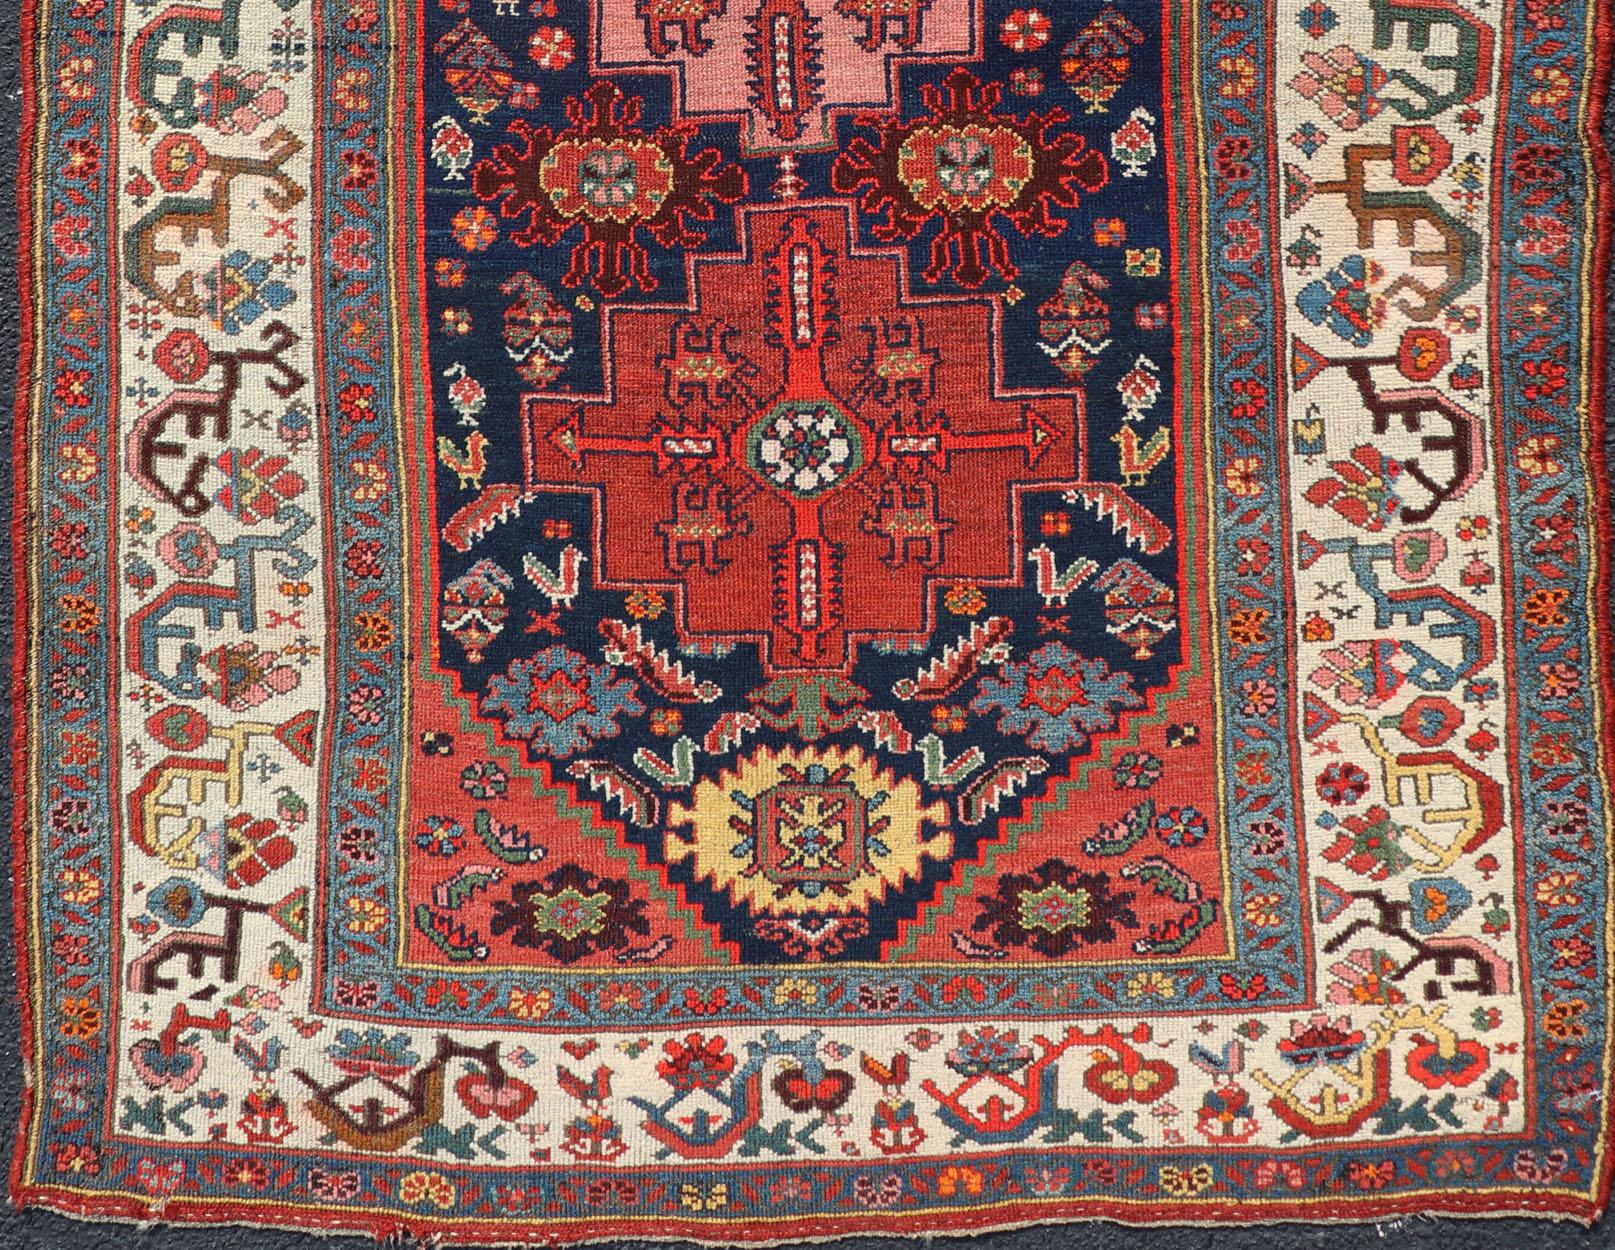 Rich vegetable colors in Blue and red Tribal Medallion design fine weave Kurdish antique rug from Persia, rug R20-0503, country of origin / type: Iran / Kurdish, circa 1900.

Measures: 3'10 x 6'5

This antique Kurdish tribal rug was woven by